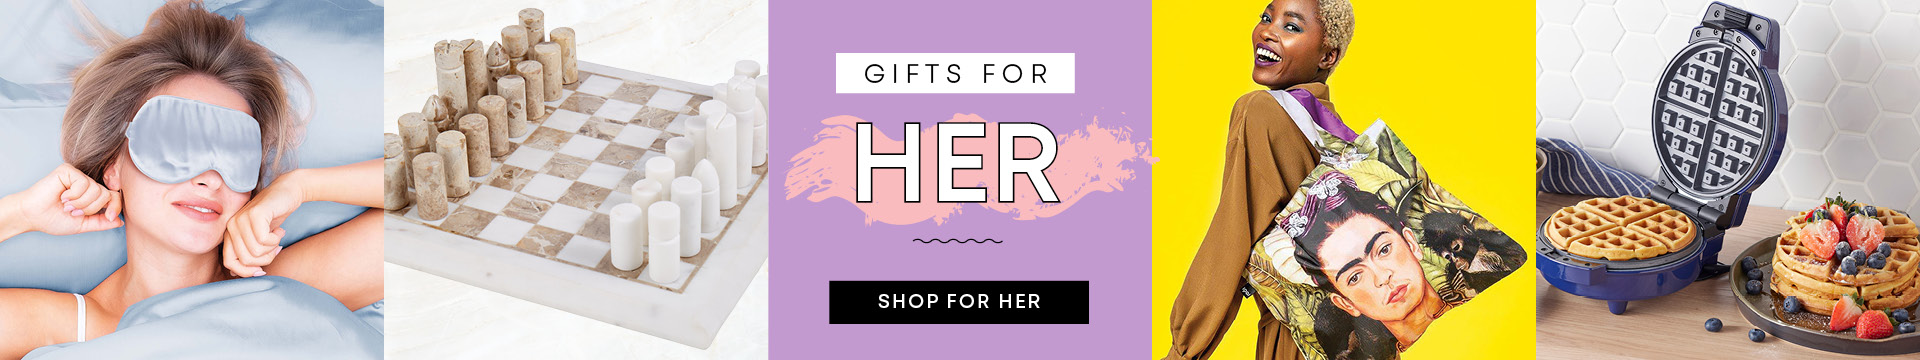 Top Gifts for Her